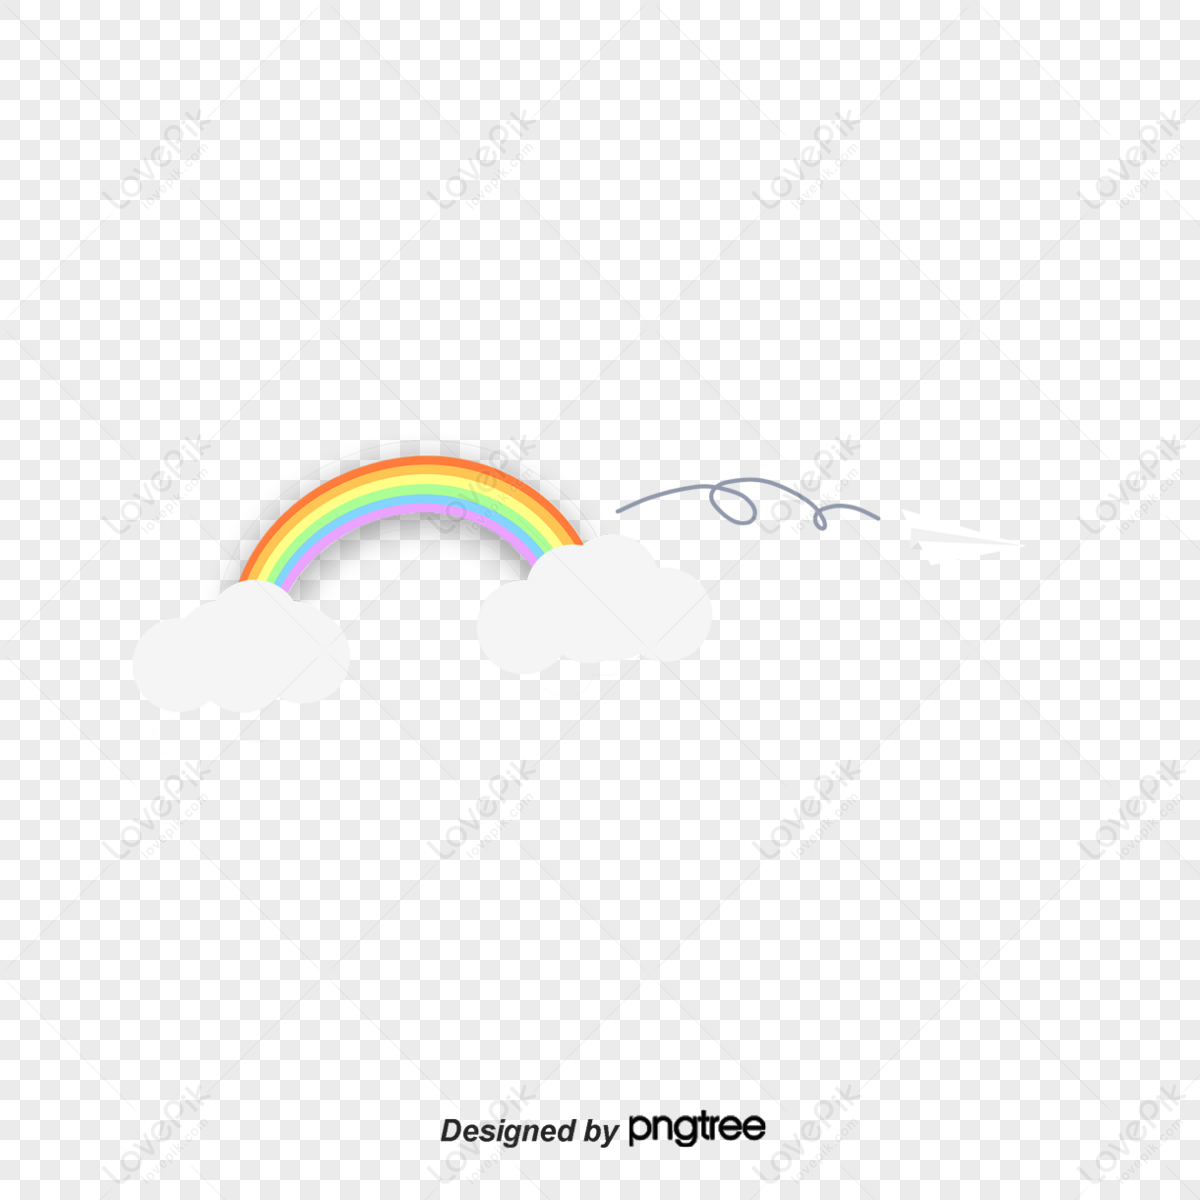 PNG Image Of Rainbow Line With A Clear Background - Image ID 48386